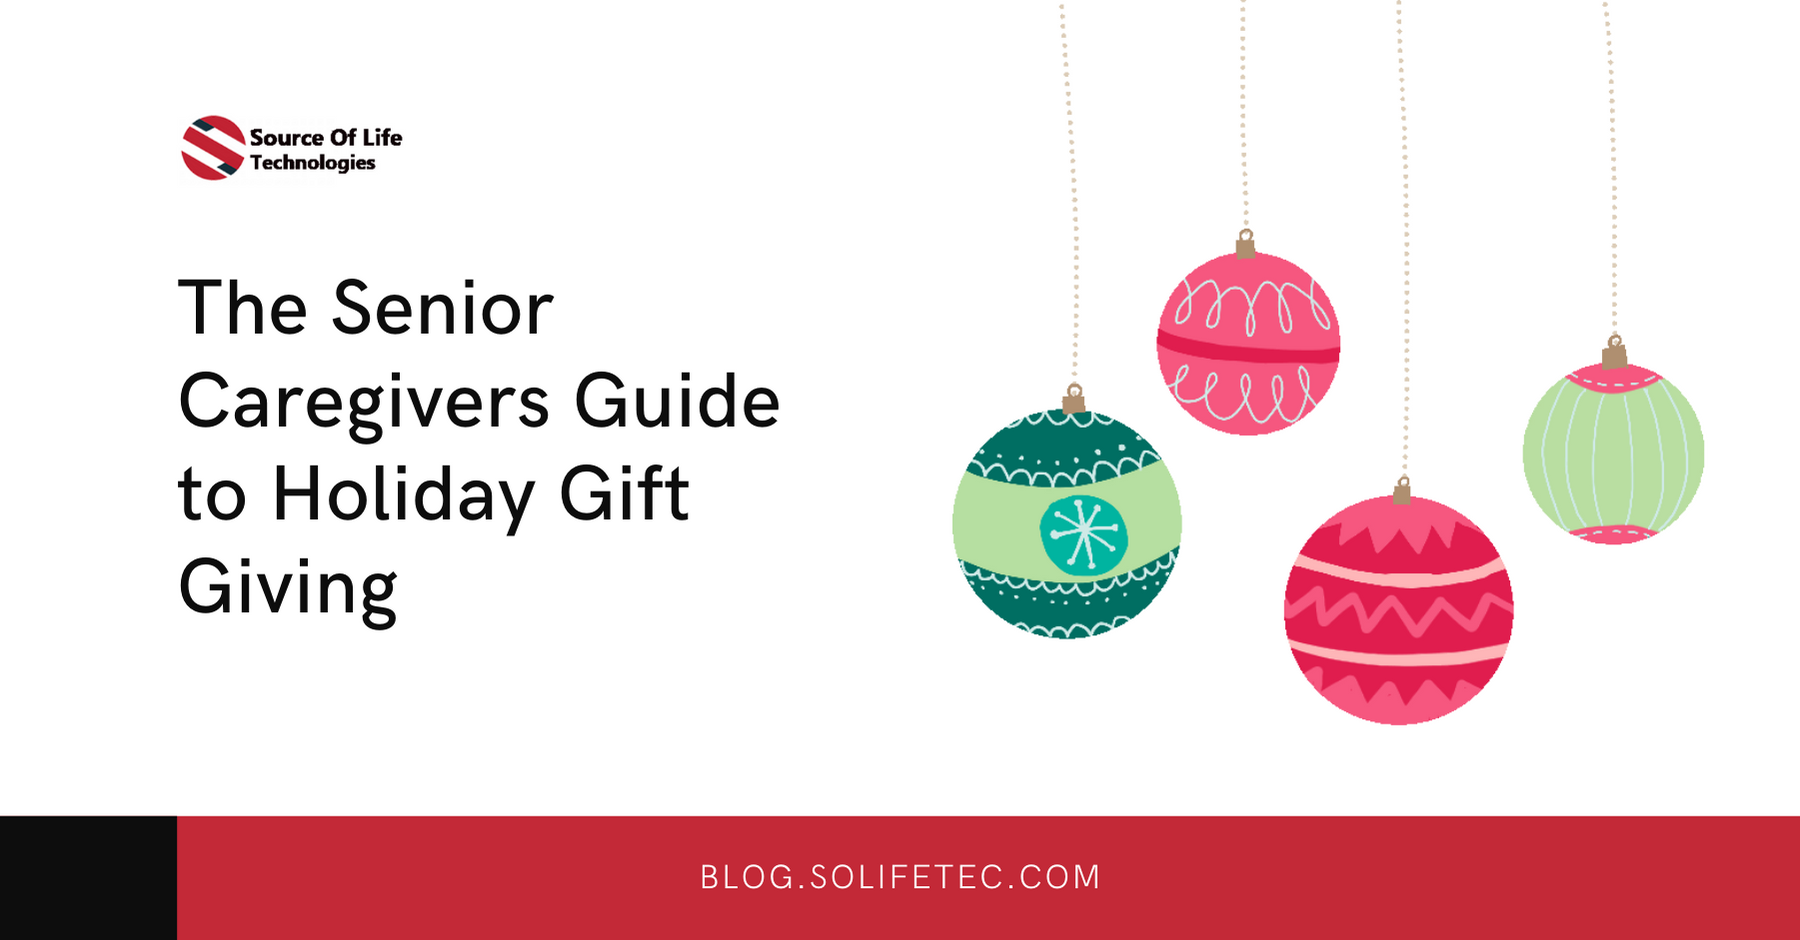 The Senior Caregiver's Guide to Holiday Gift Giving